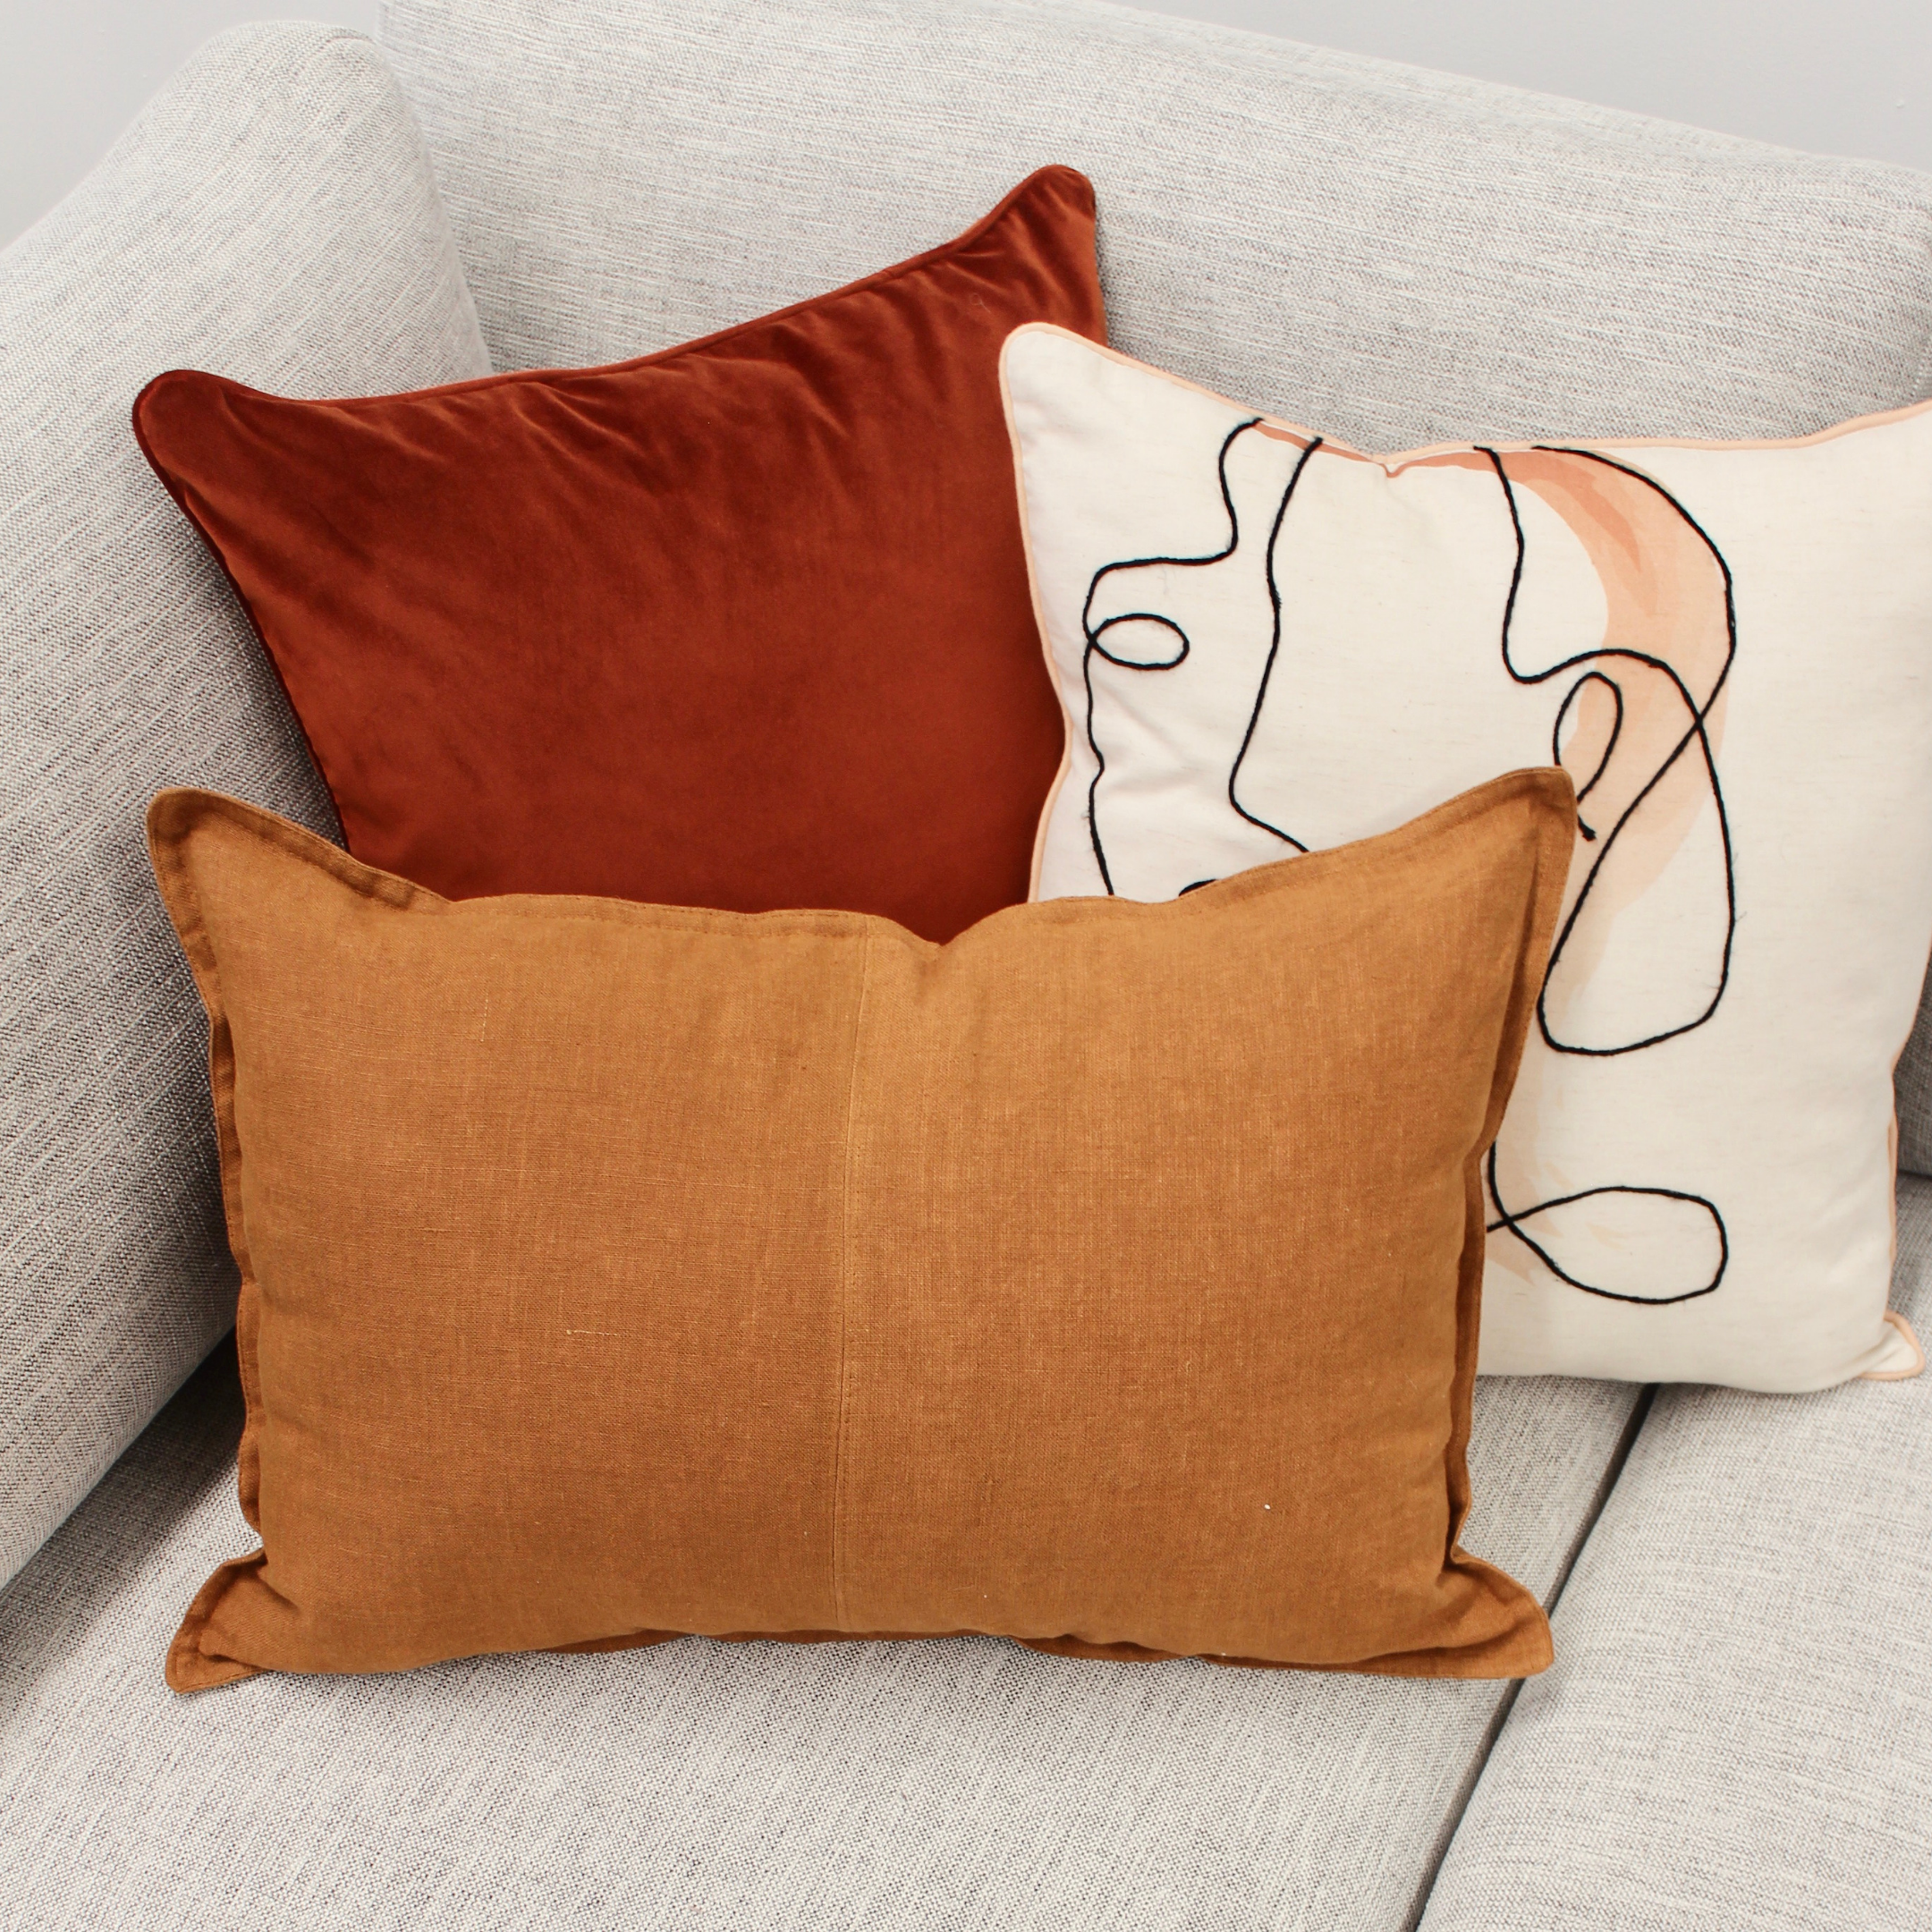 warm-up-your-home-for-autumn-cosy-cushions